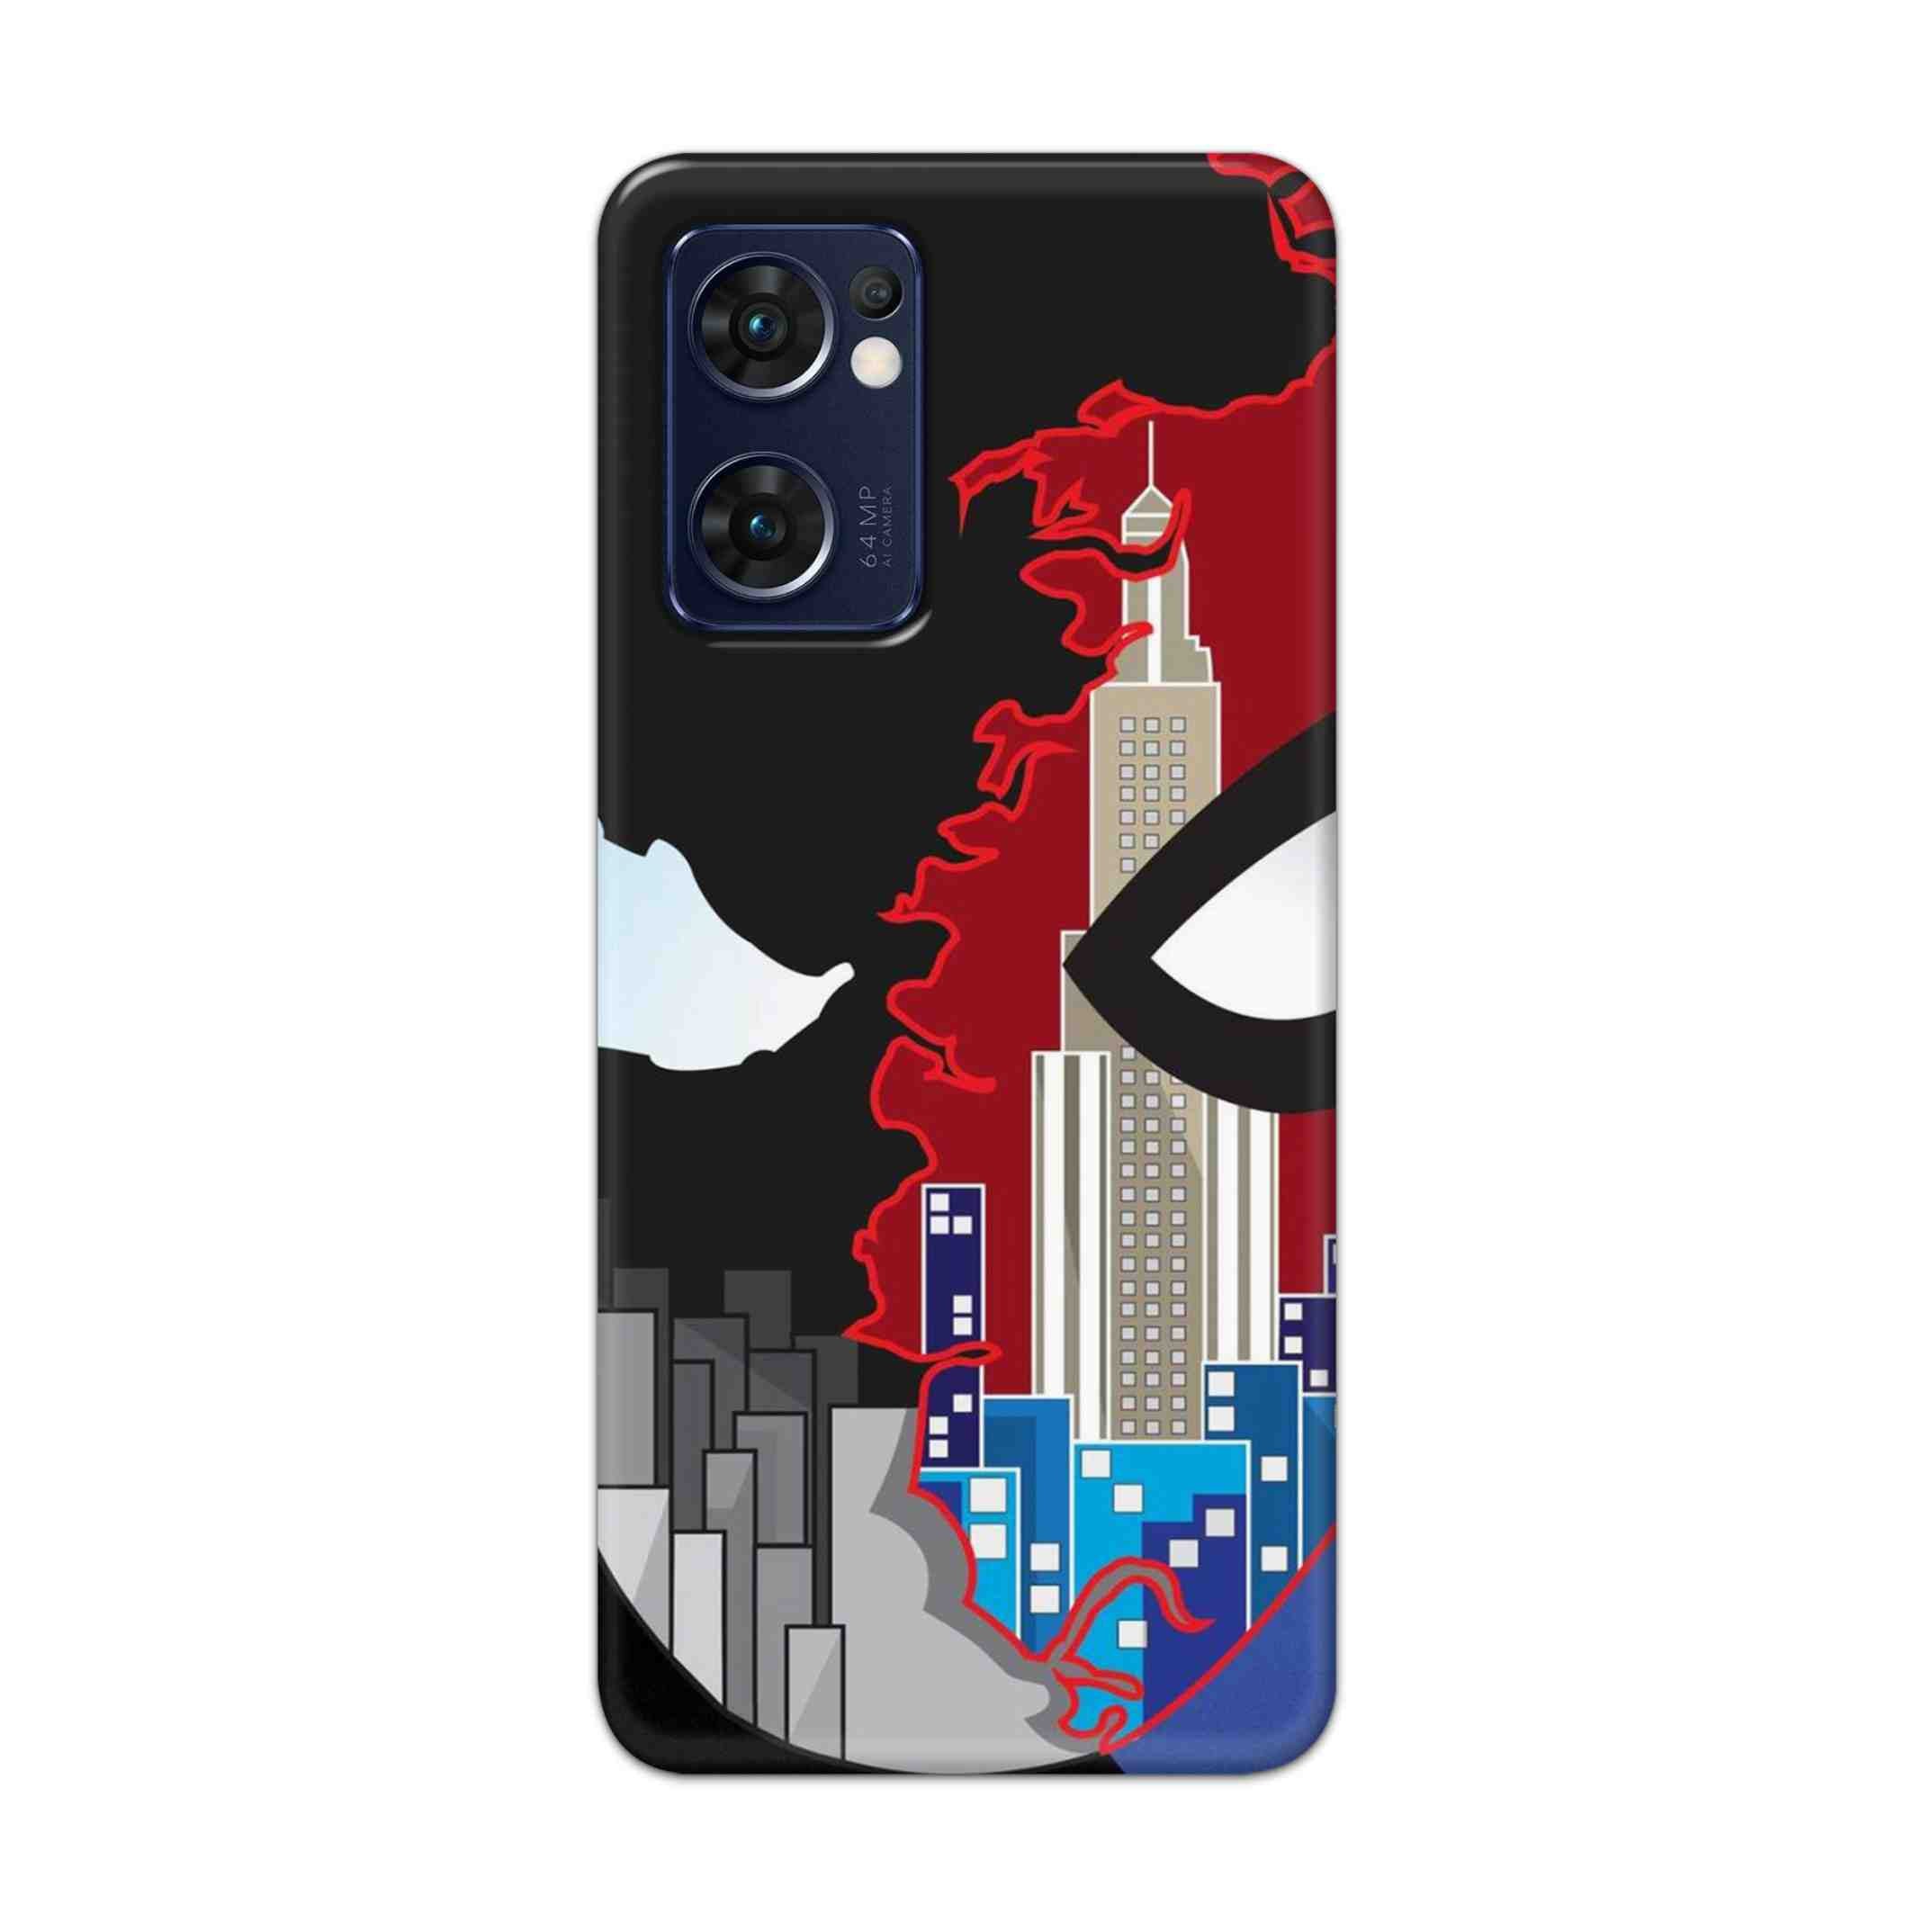 Buy Red And Black Spiderman Hard Back Mobile Phone Case Cover For Reno 7 5G Online